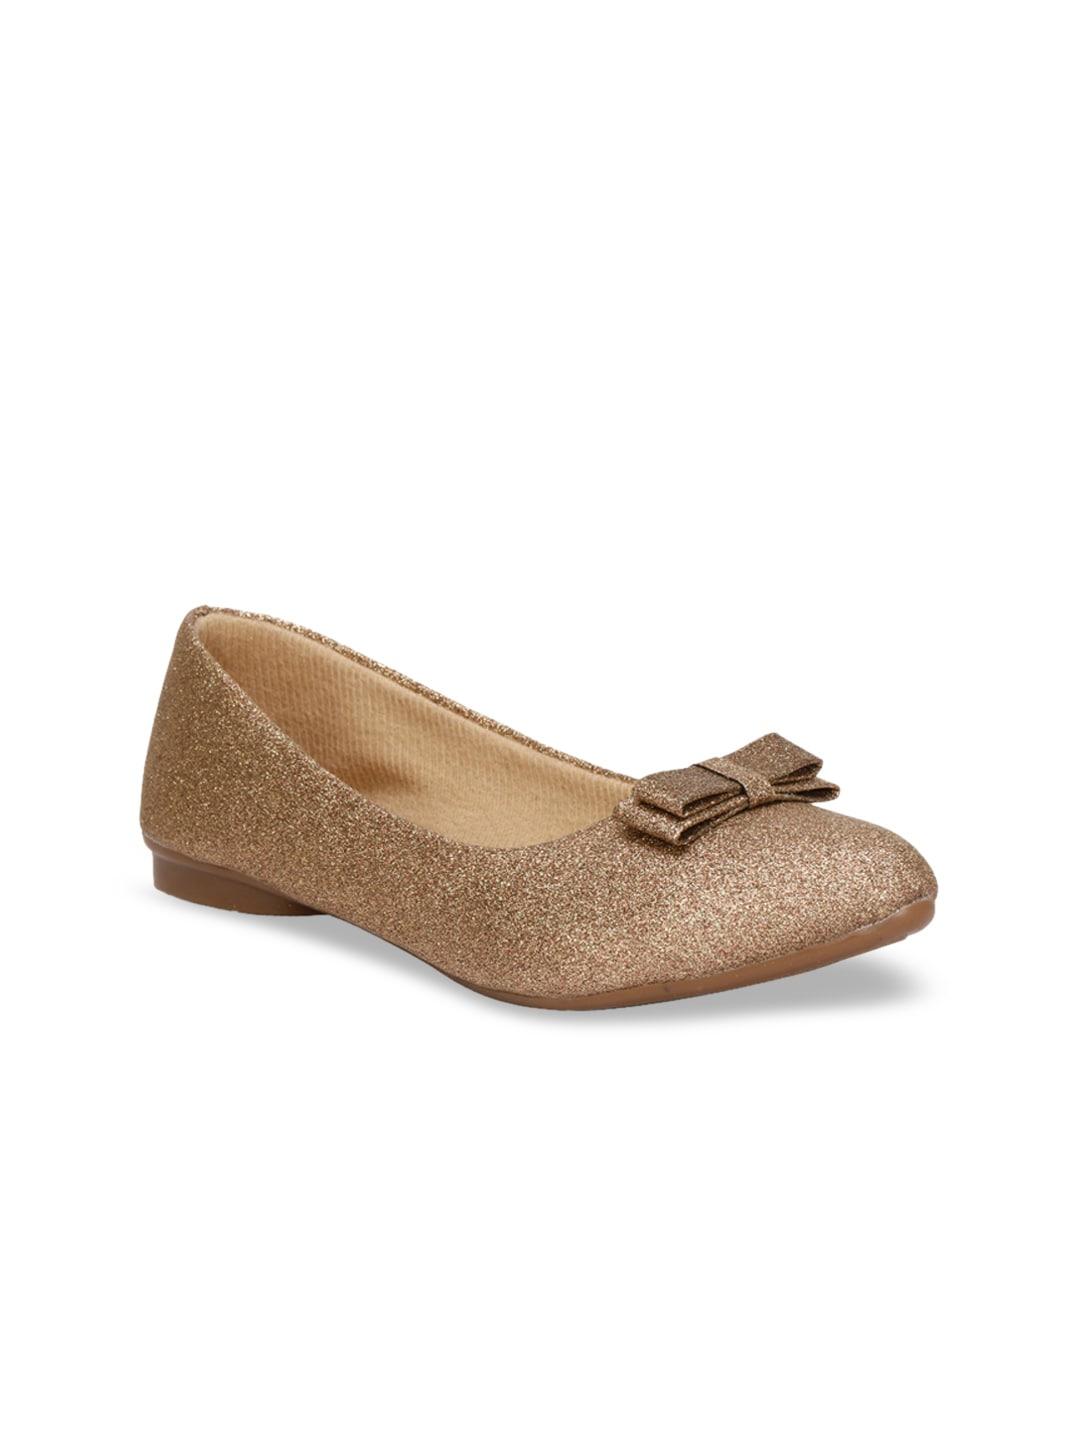 denill-women-copper-toned-ballerinas-with-bows-flats